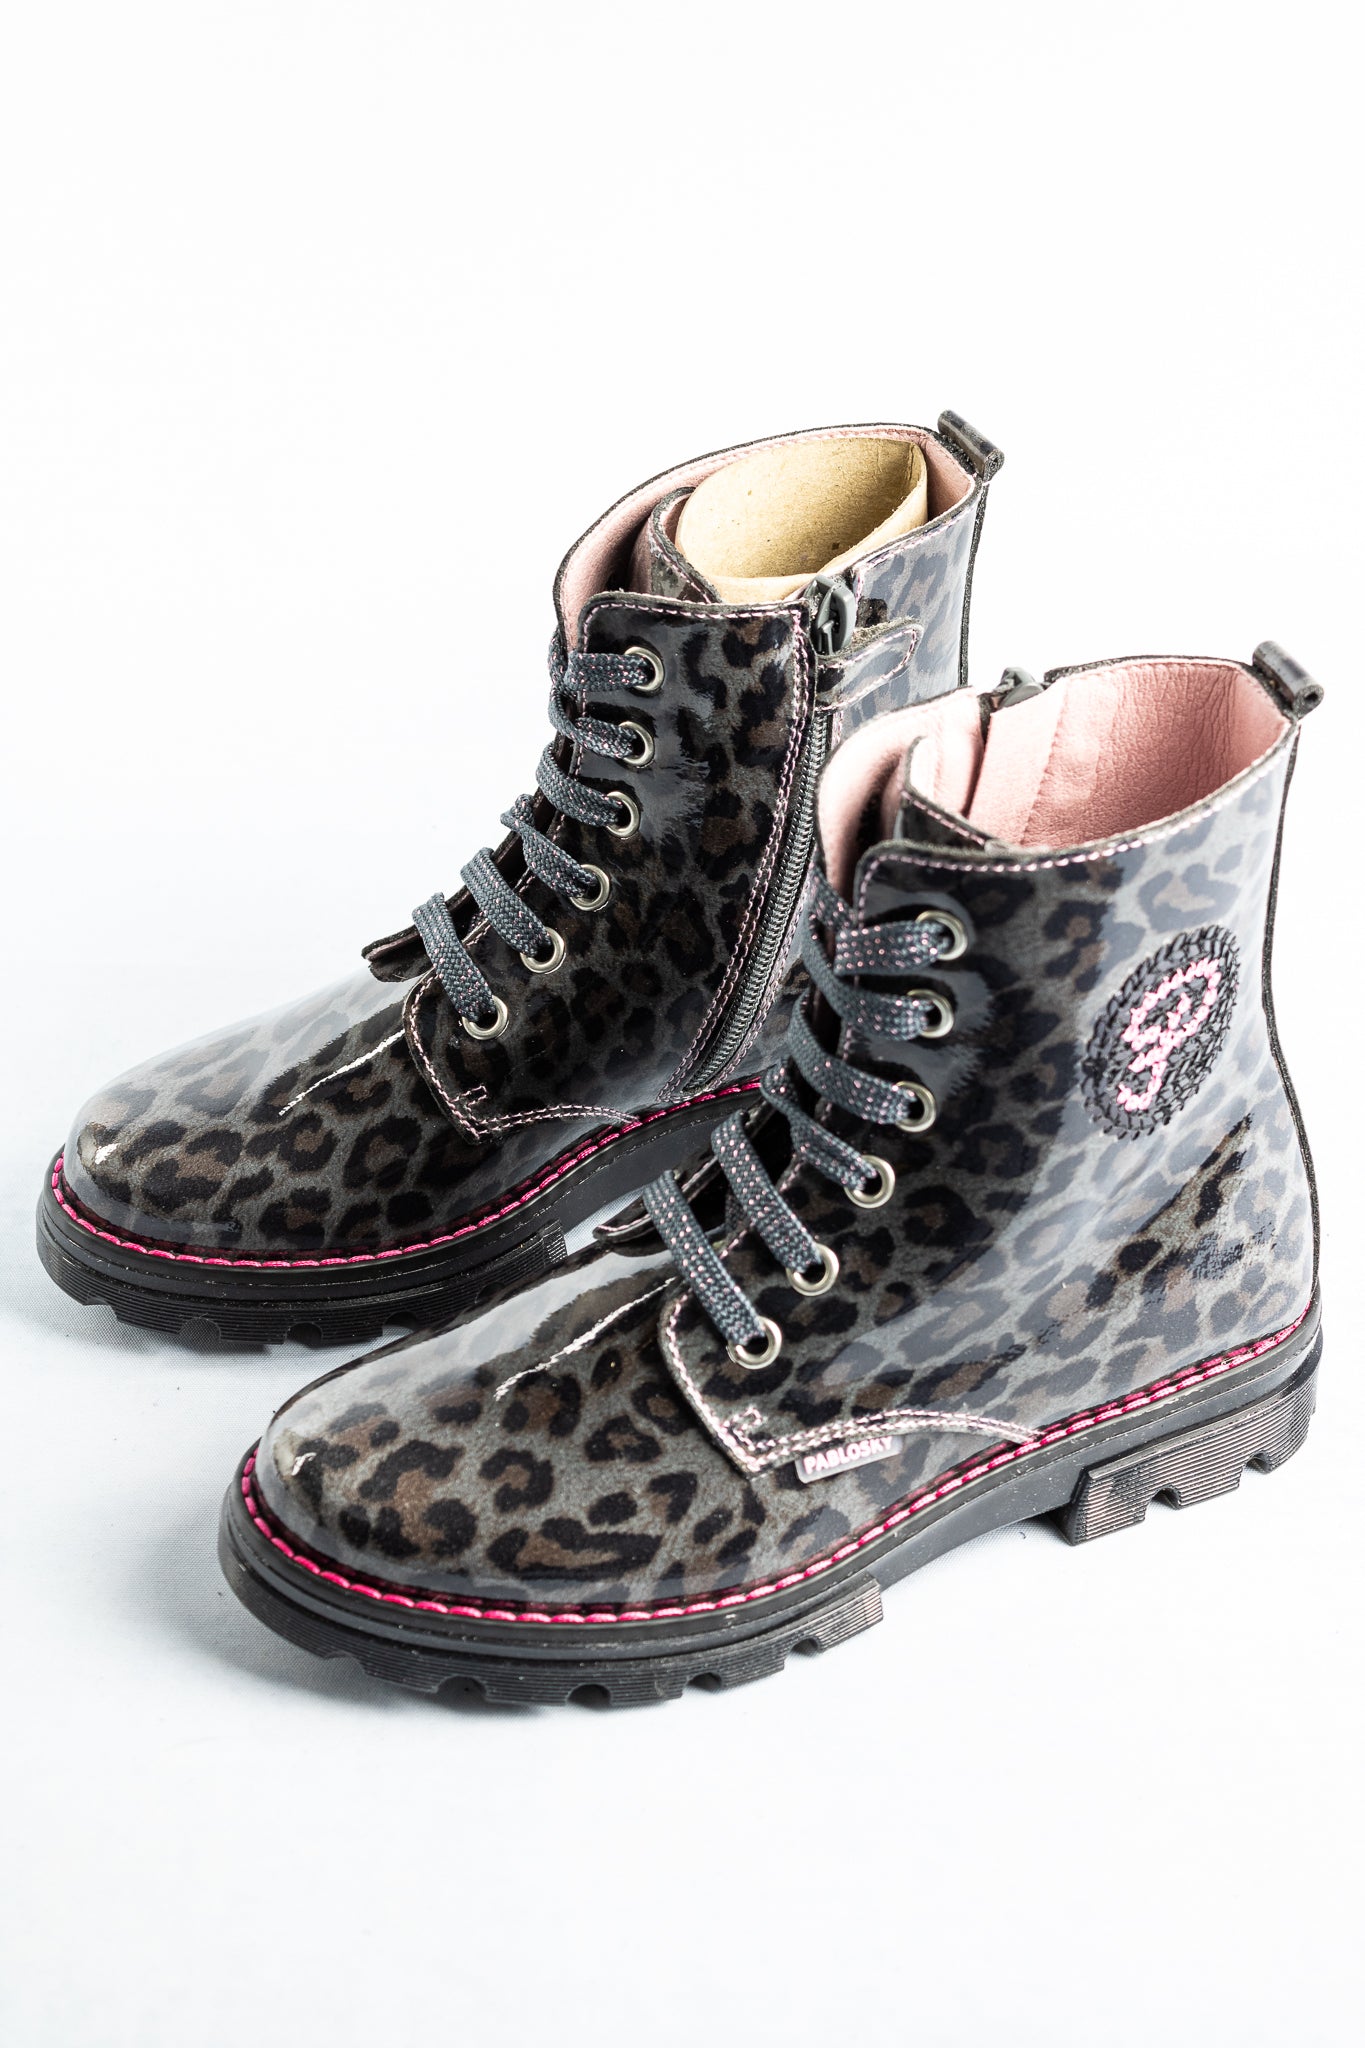 489751 Pablosky Animal Print Lace and Zip Boots for sale online ireland